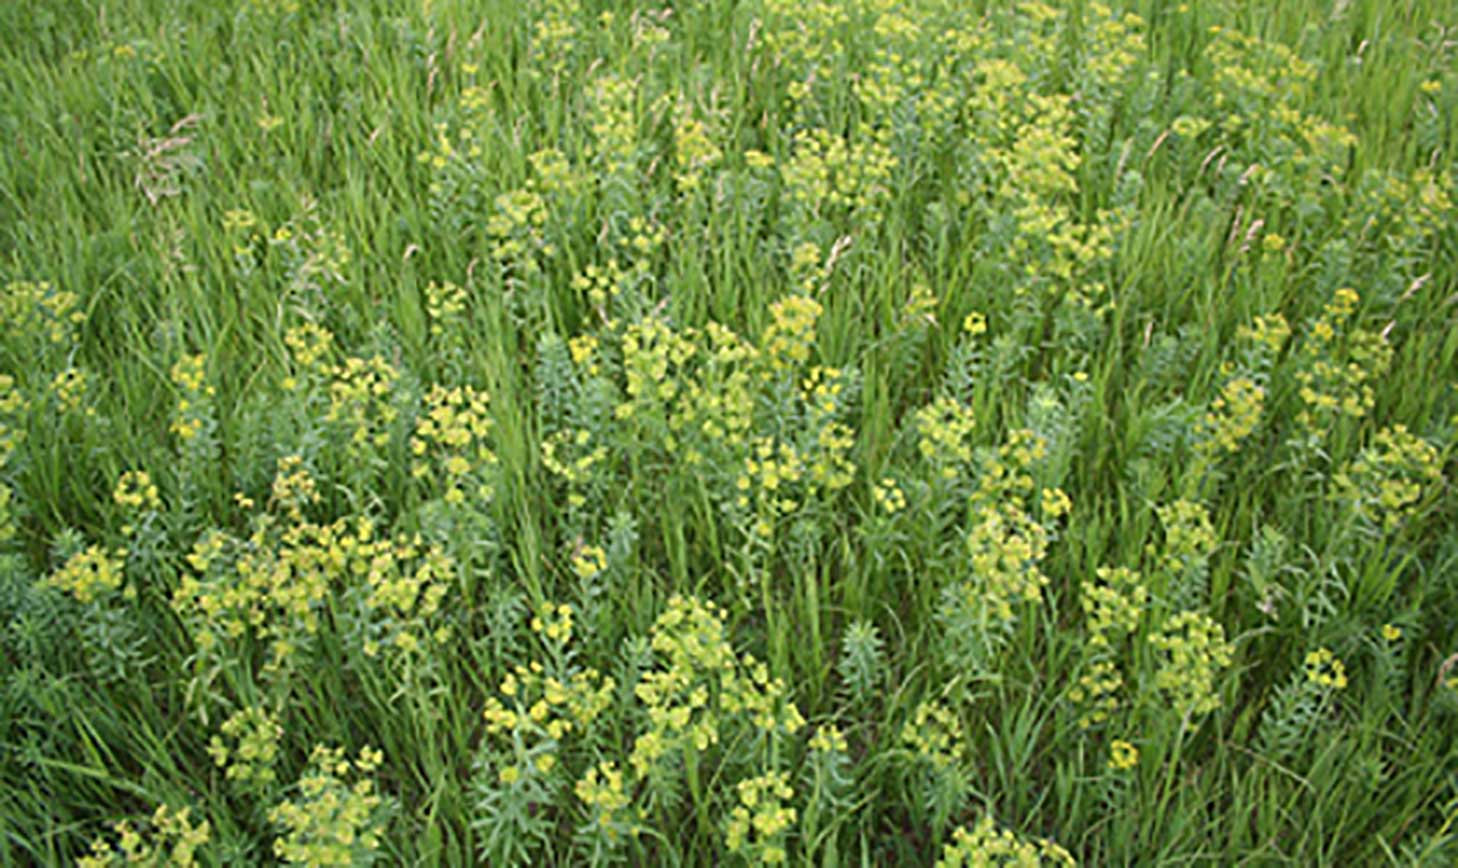 A thick patch of yellow, flowering leafy spurge plants growing in a pasture.